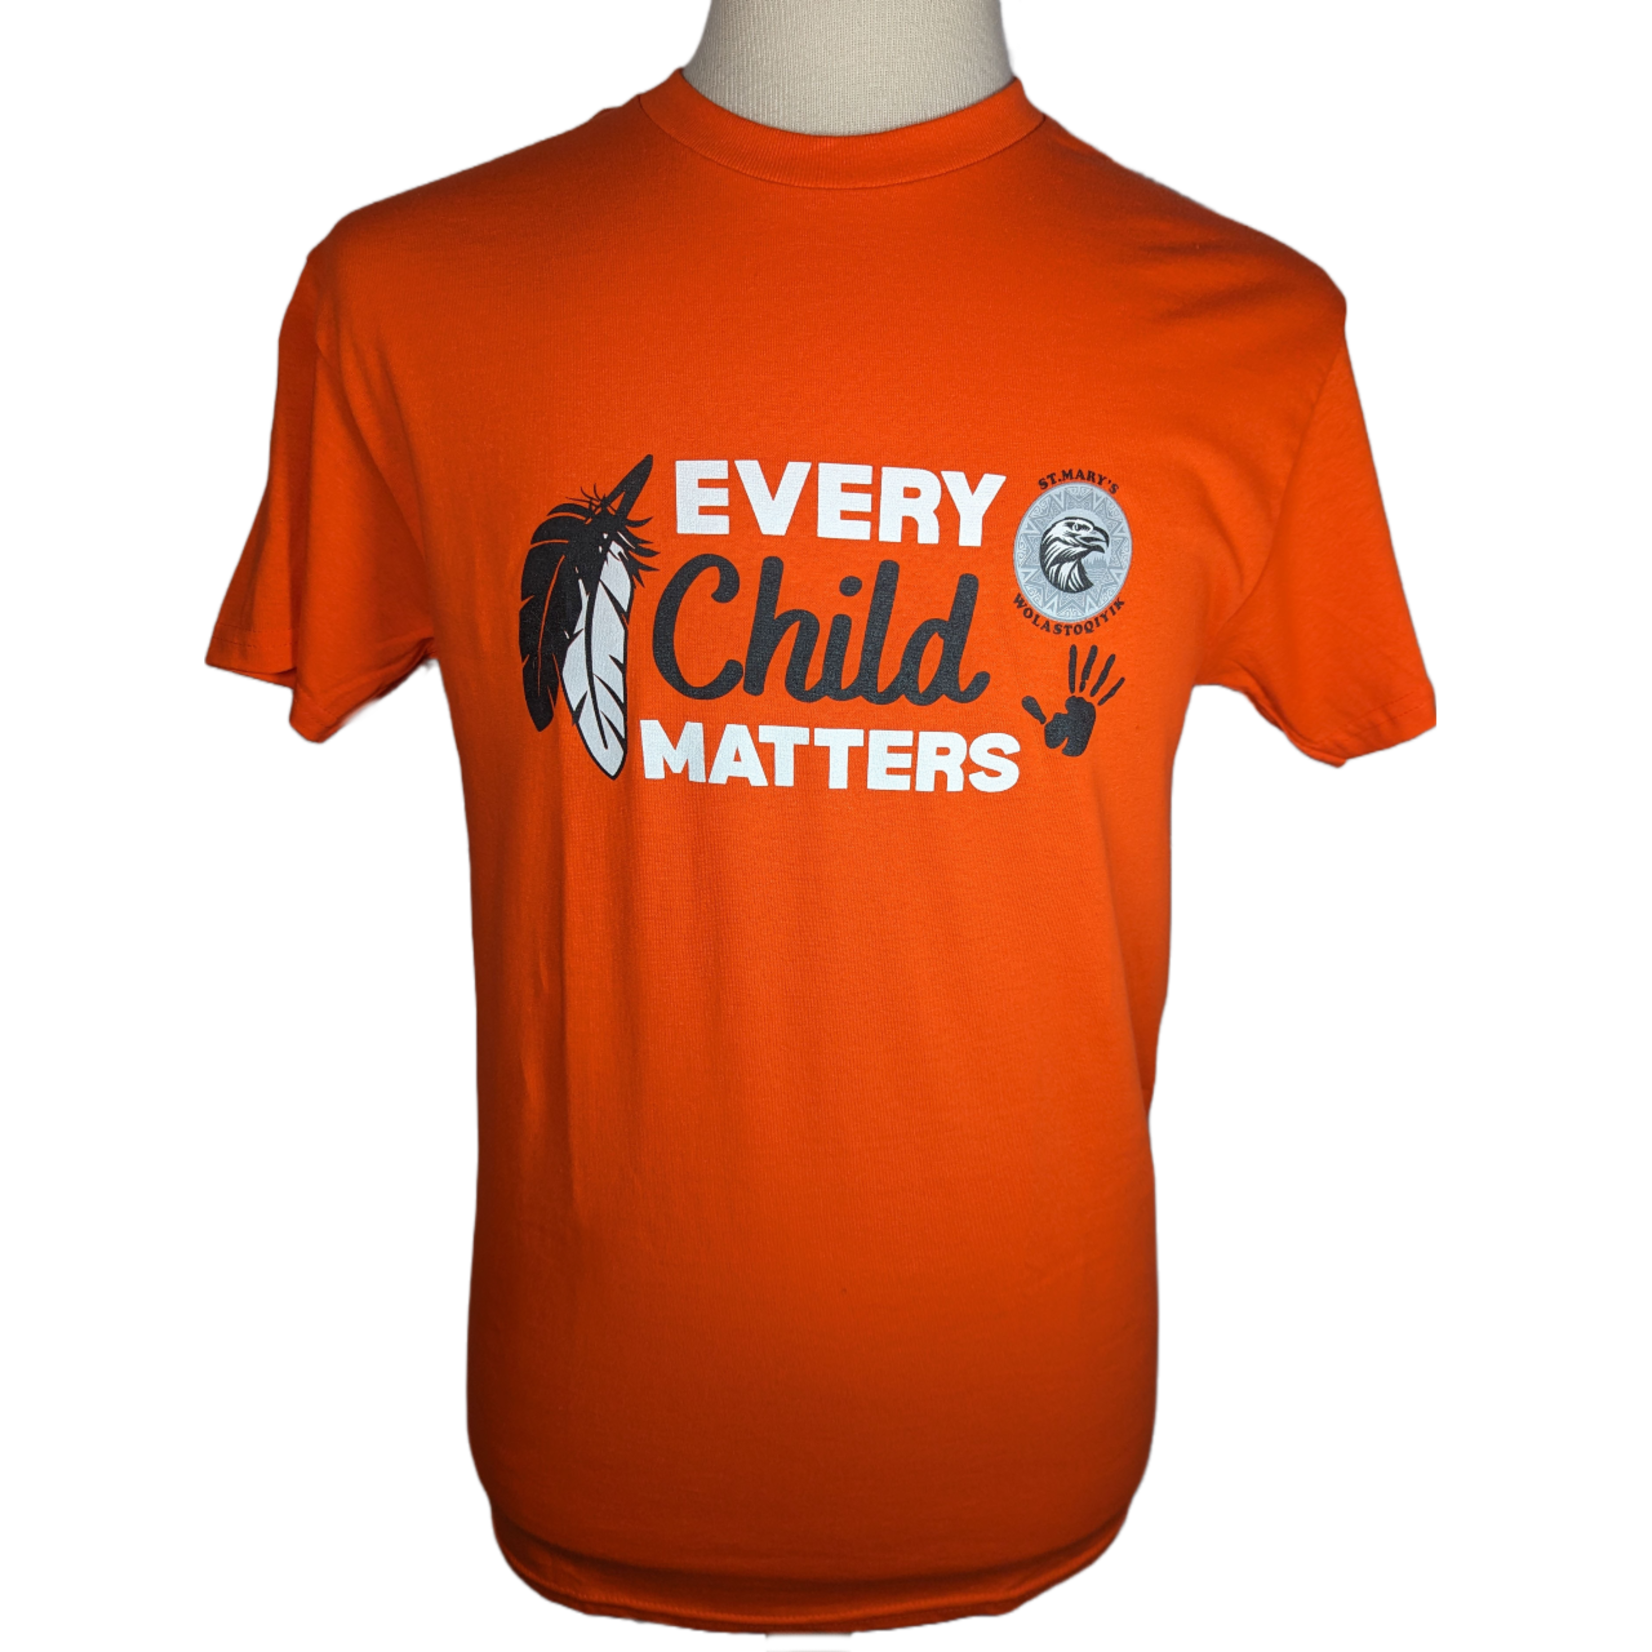 Every Child Matters Tee